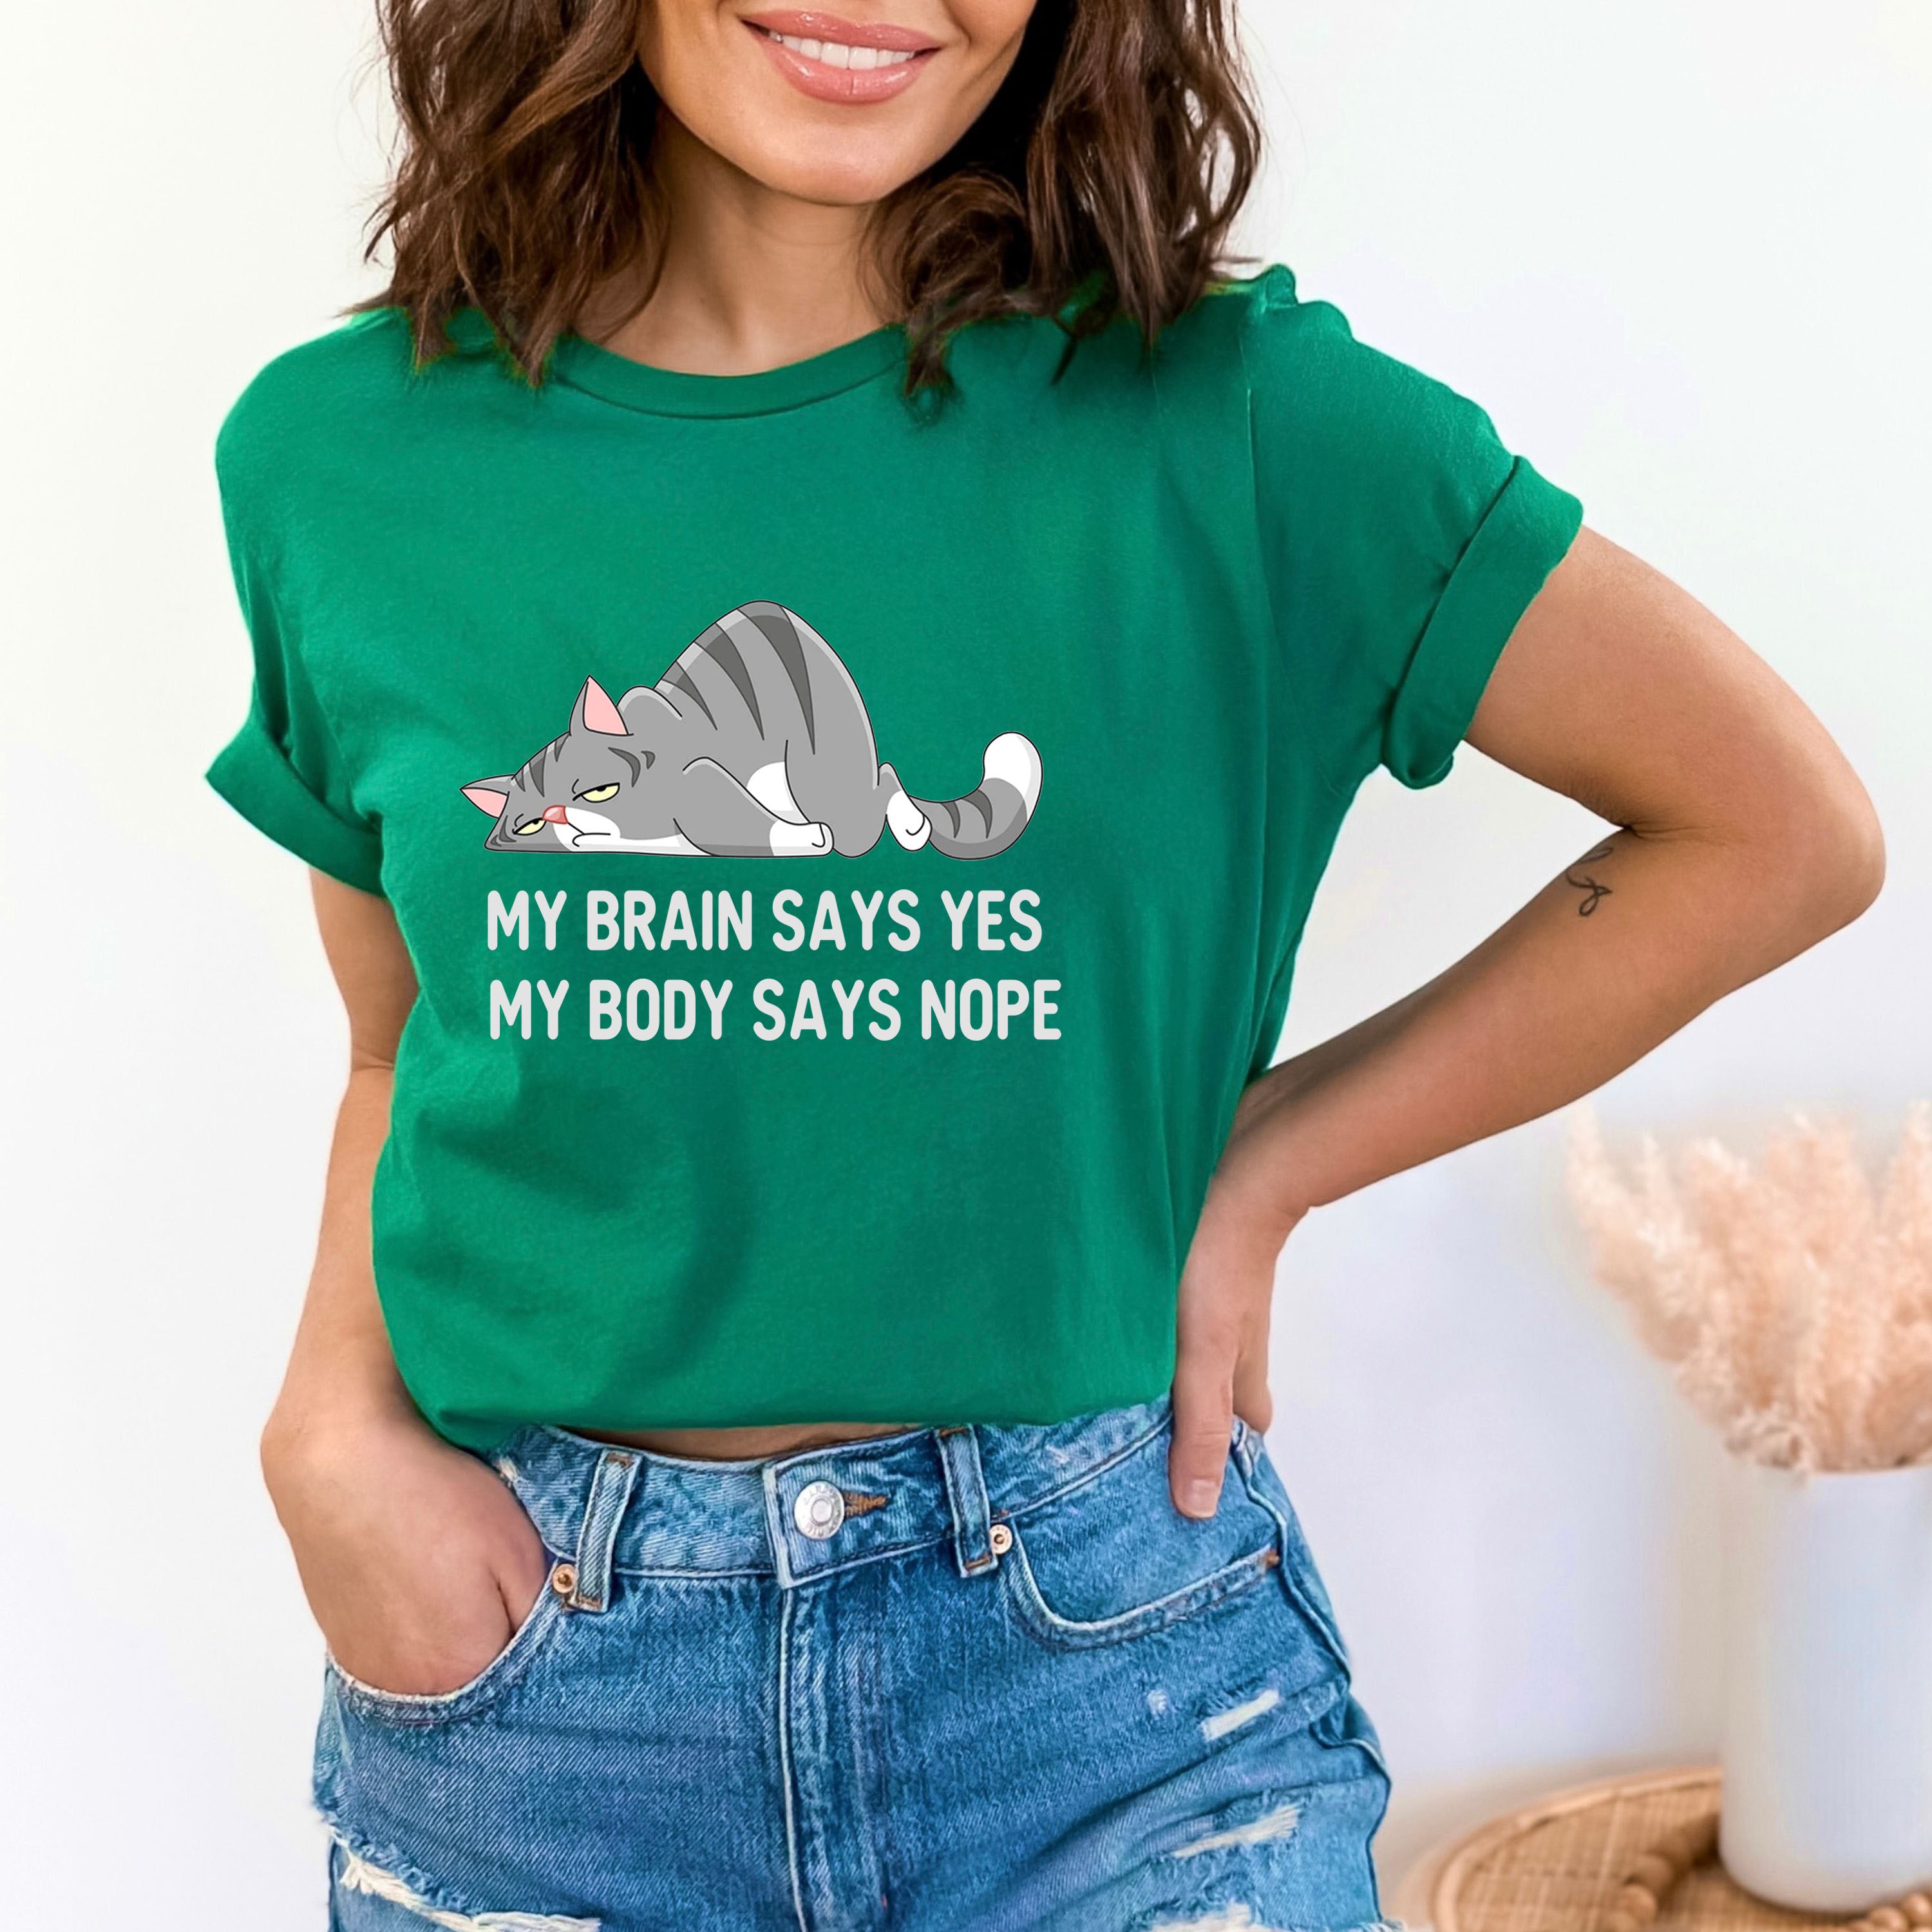 My Brains Says Yes - Bella canvas